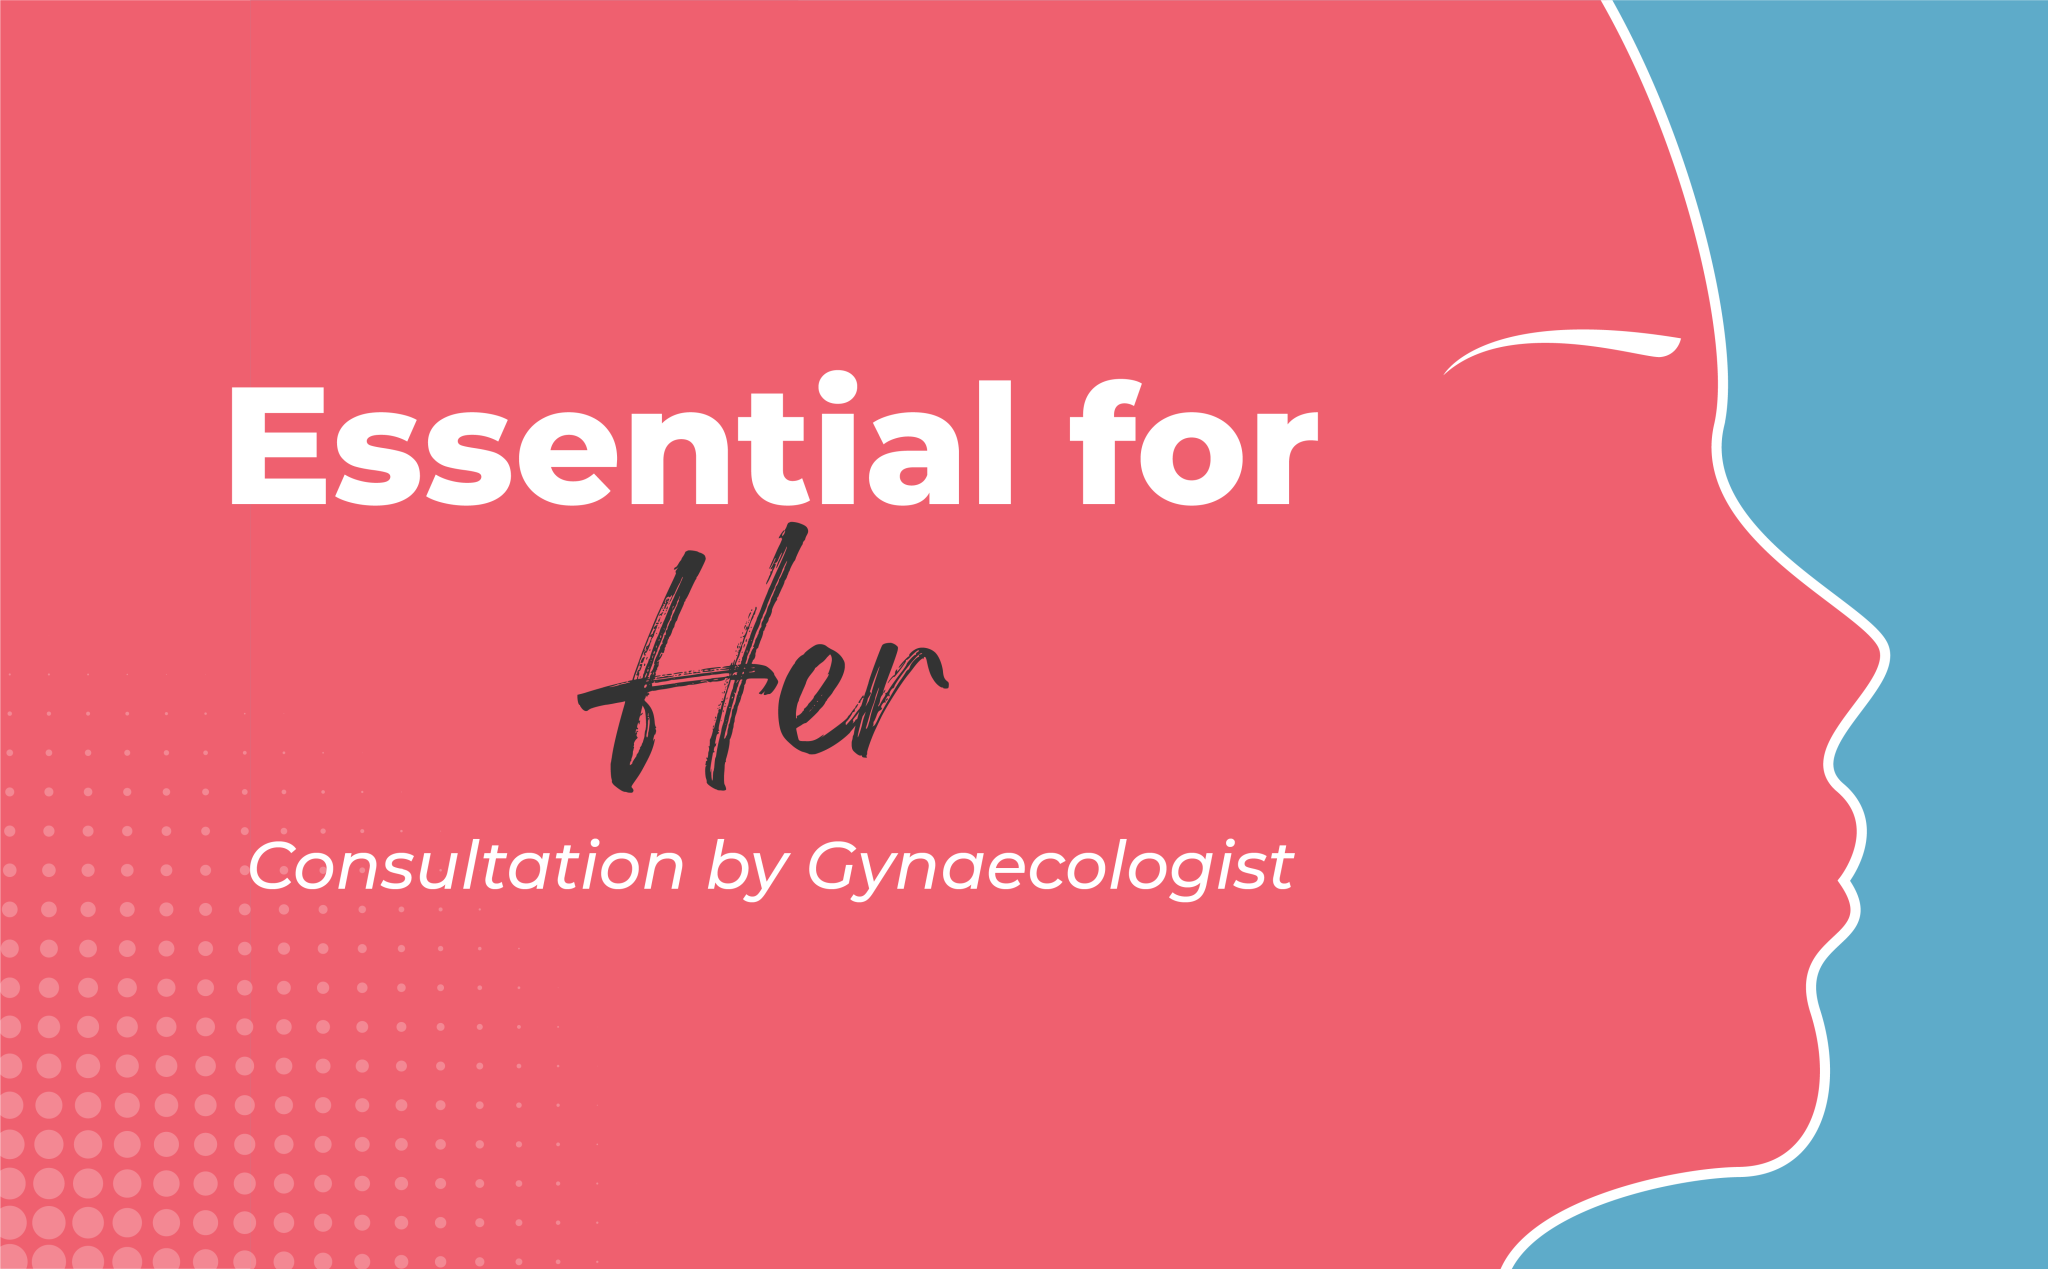 Essential for HER [Consultation by Gynaecologist]